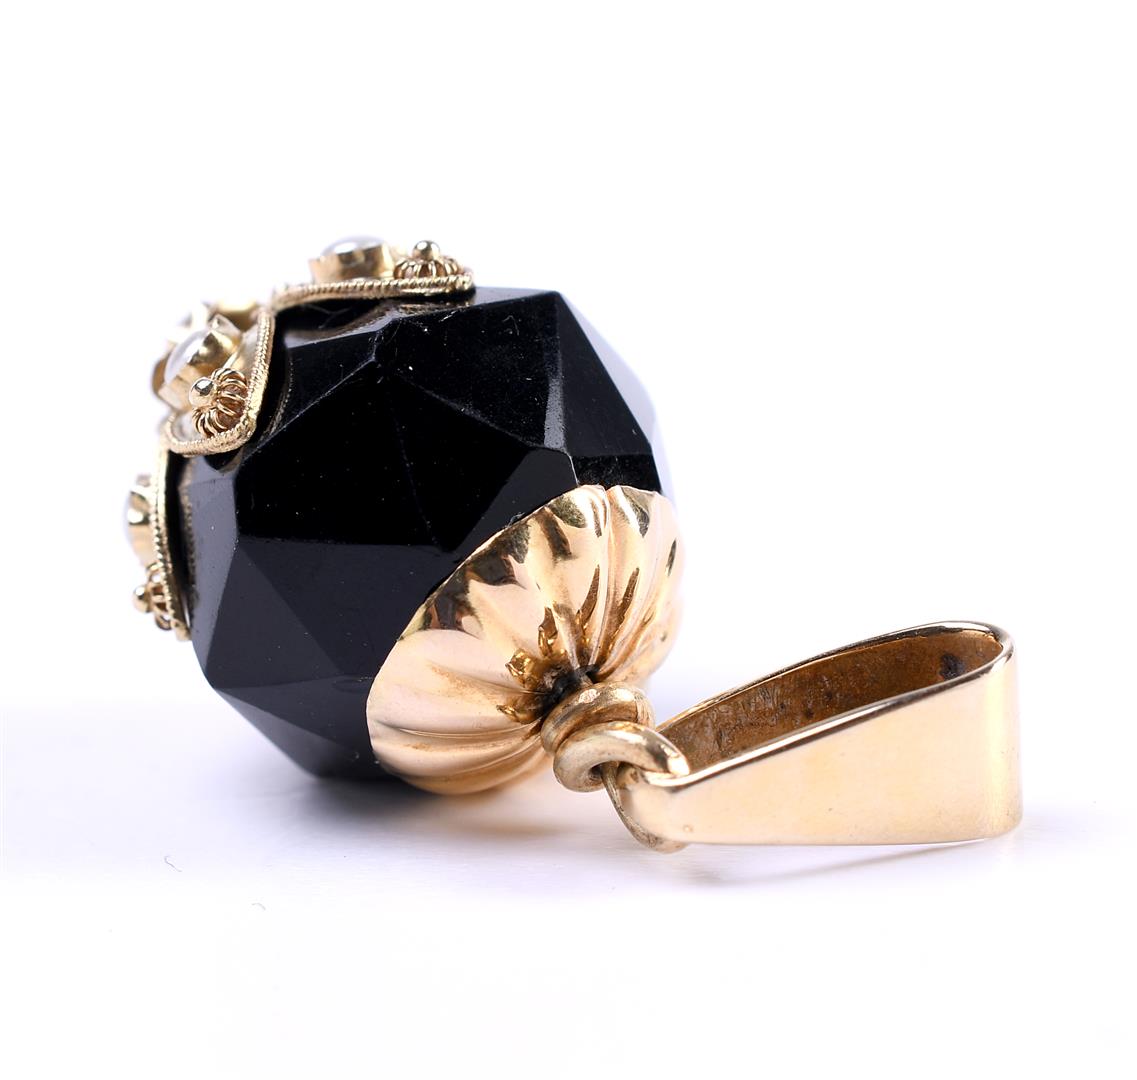 14kt yellow gold Surinamese Ogri ai pendant with facet cut onyx - Image 3 of 3